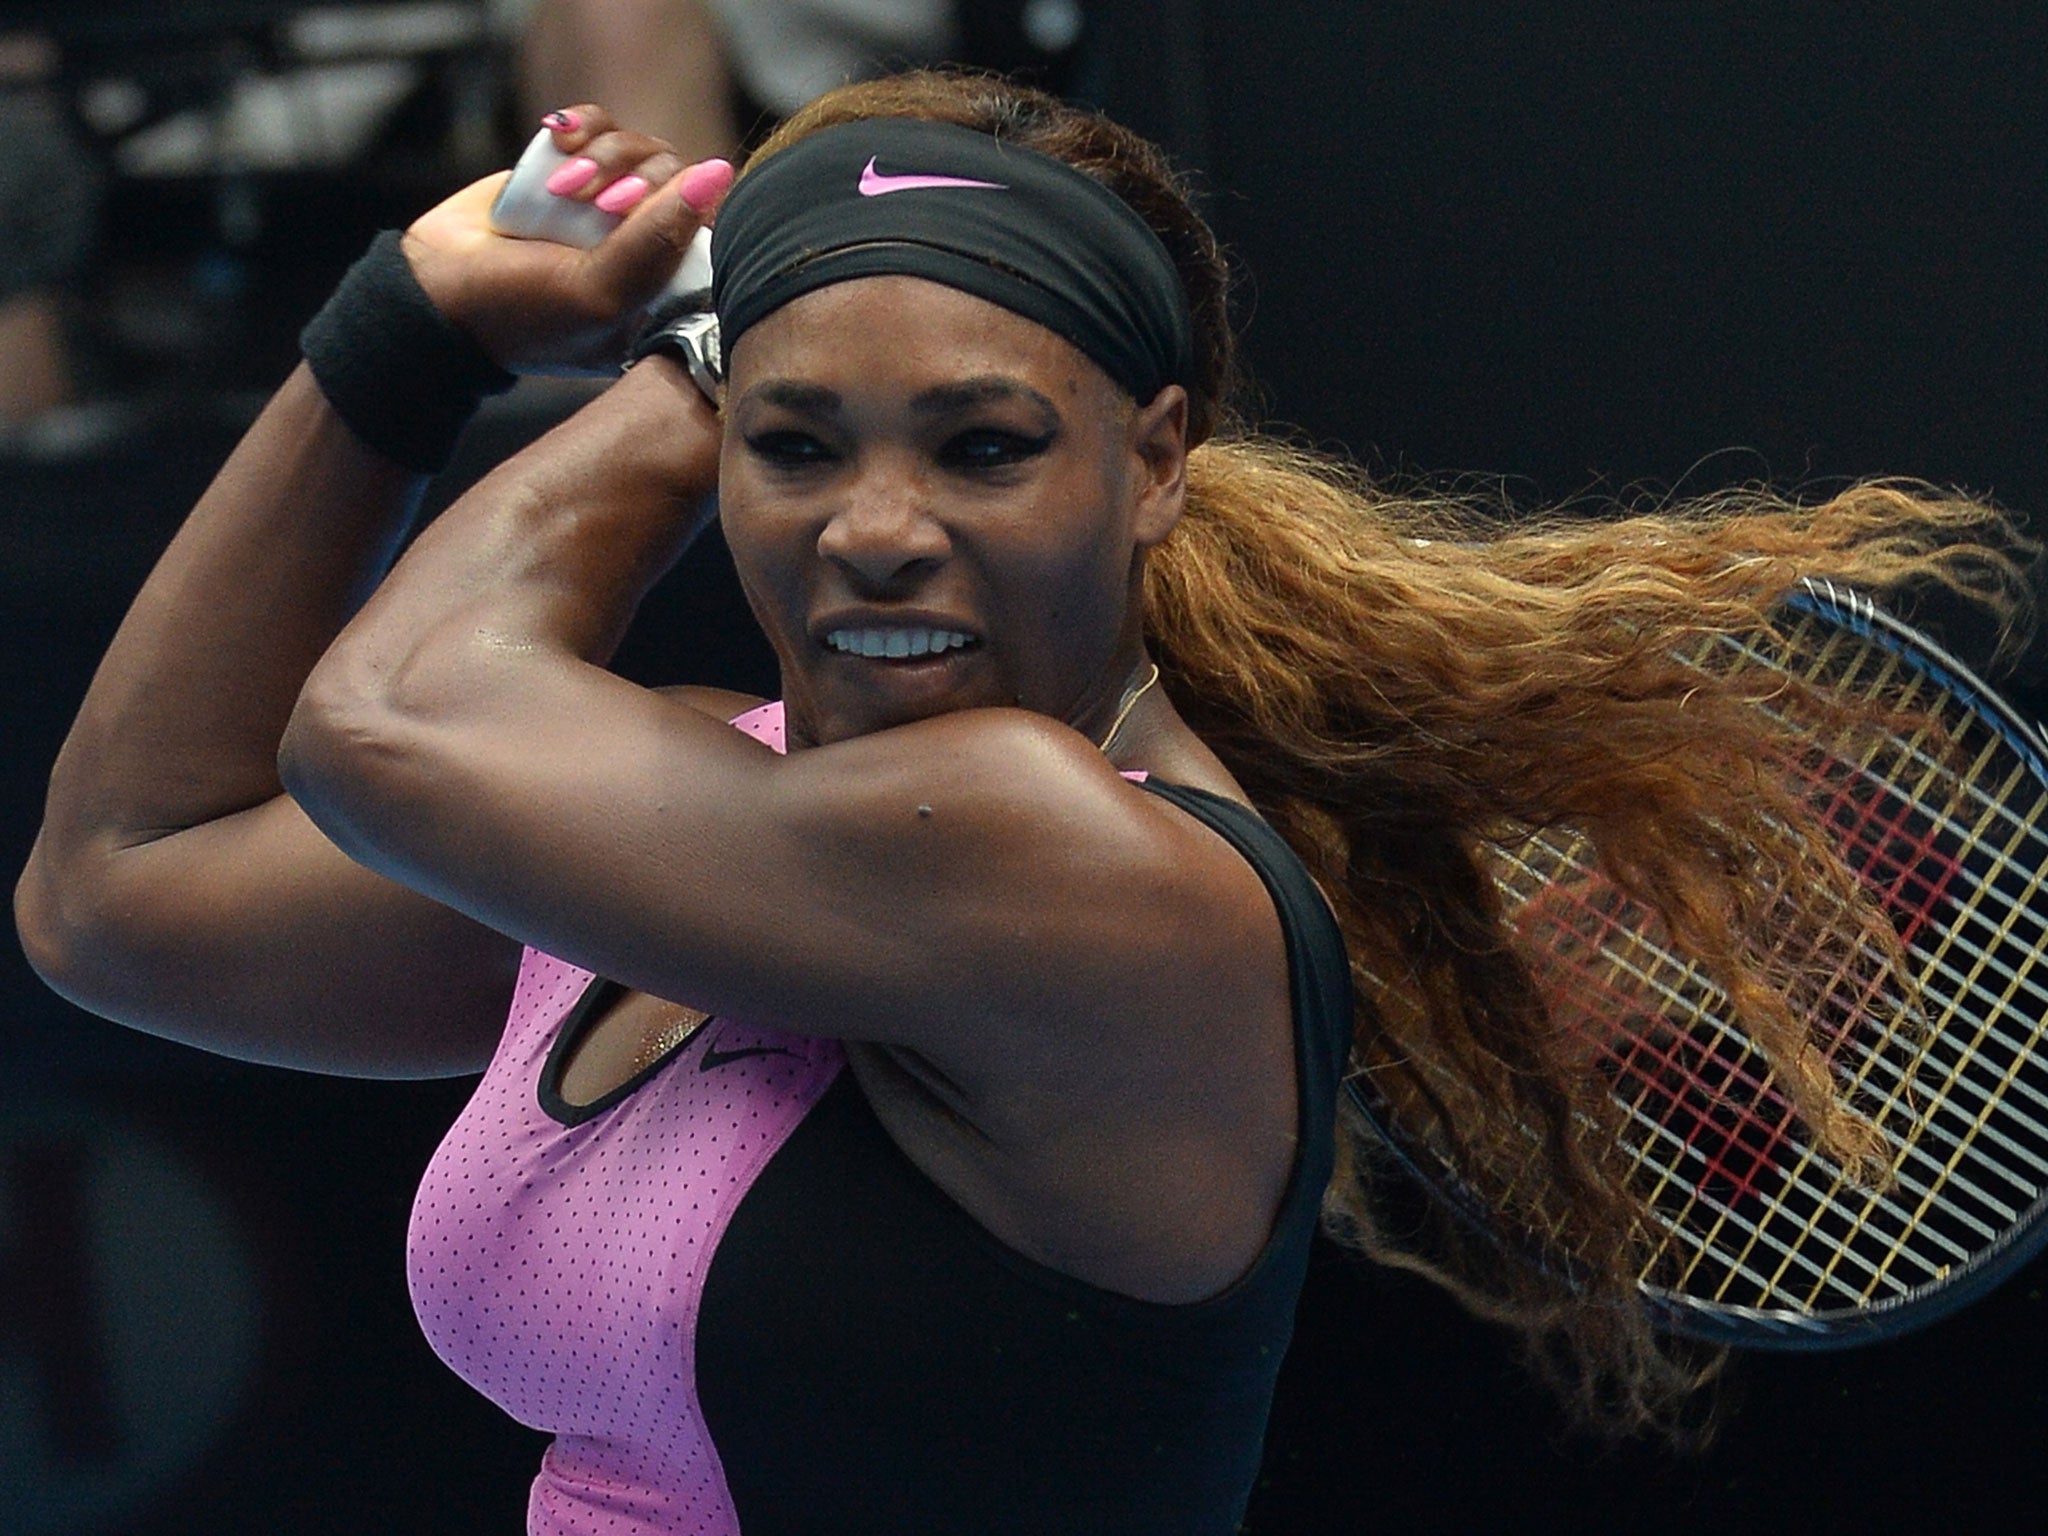 Serena Williams progressed to the third round of the Australian Open via a 6-1 6-2 victory over Vesna Dolonc